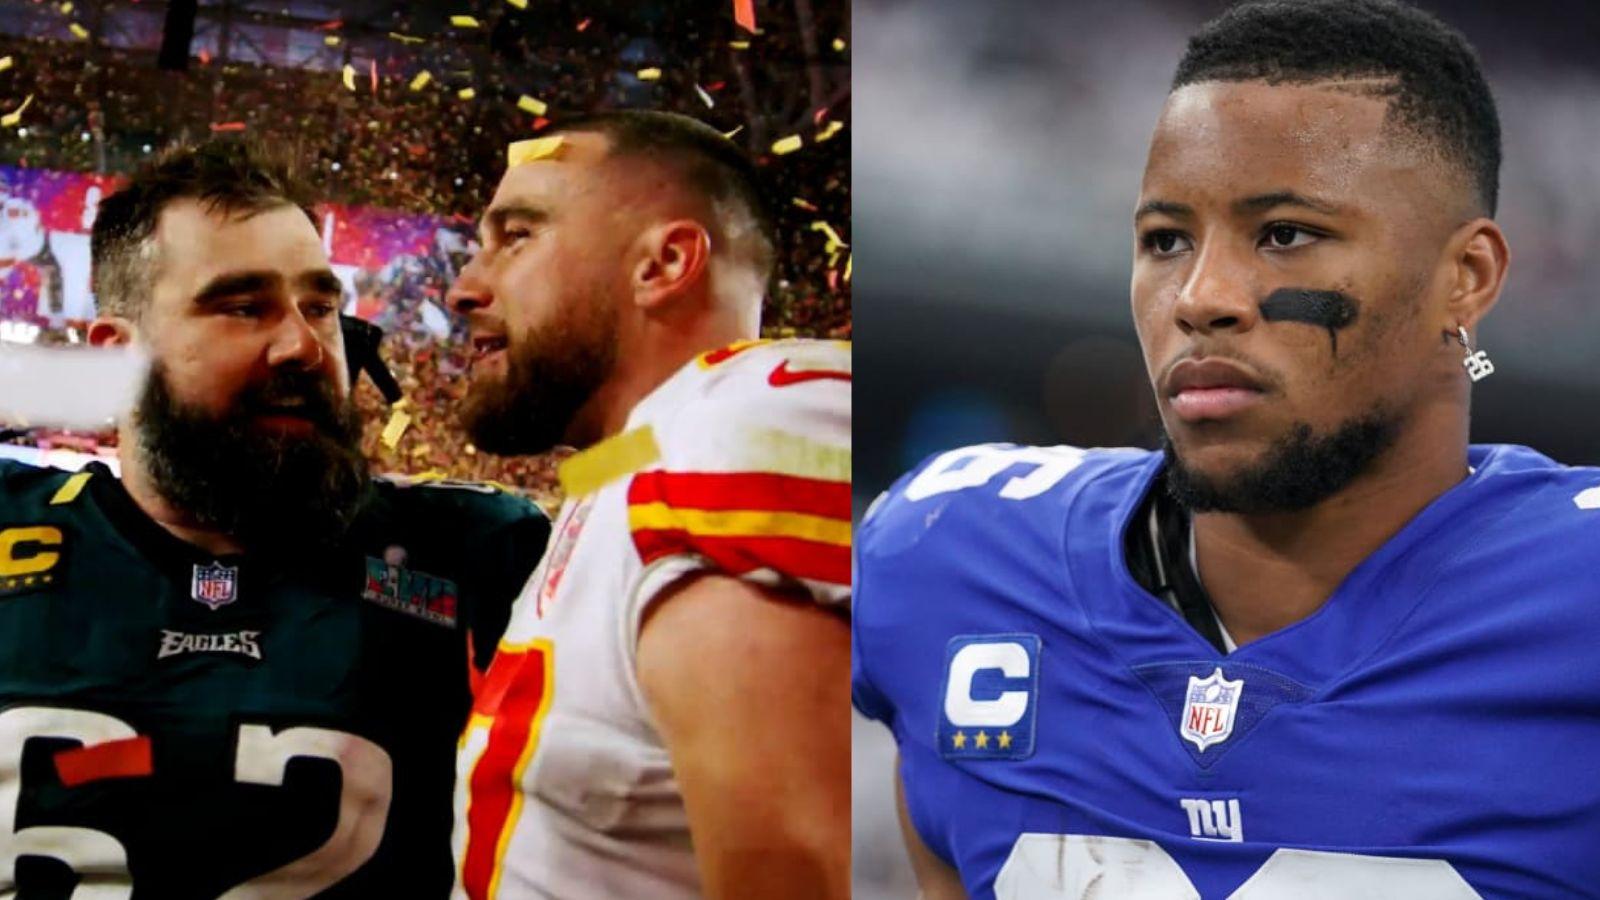 Jason Kelce and Travis Kelce after Super Bowl LVII (left) and Saquon Barkley as a member of the New York Giants (right).